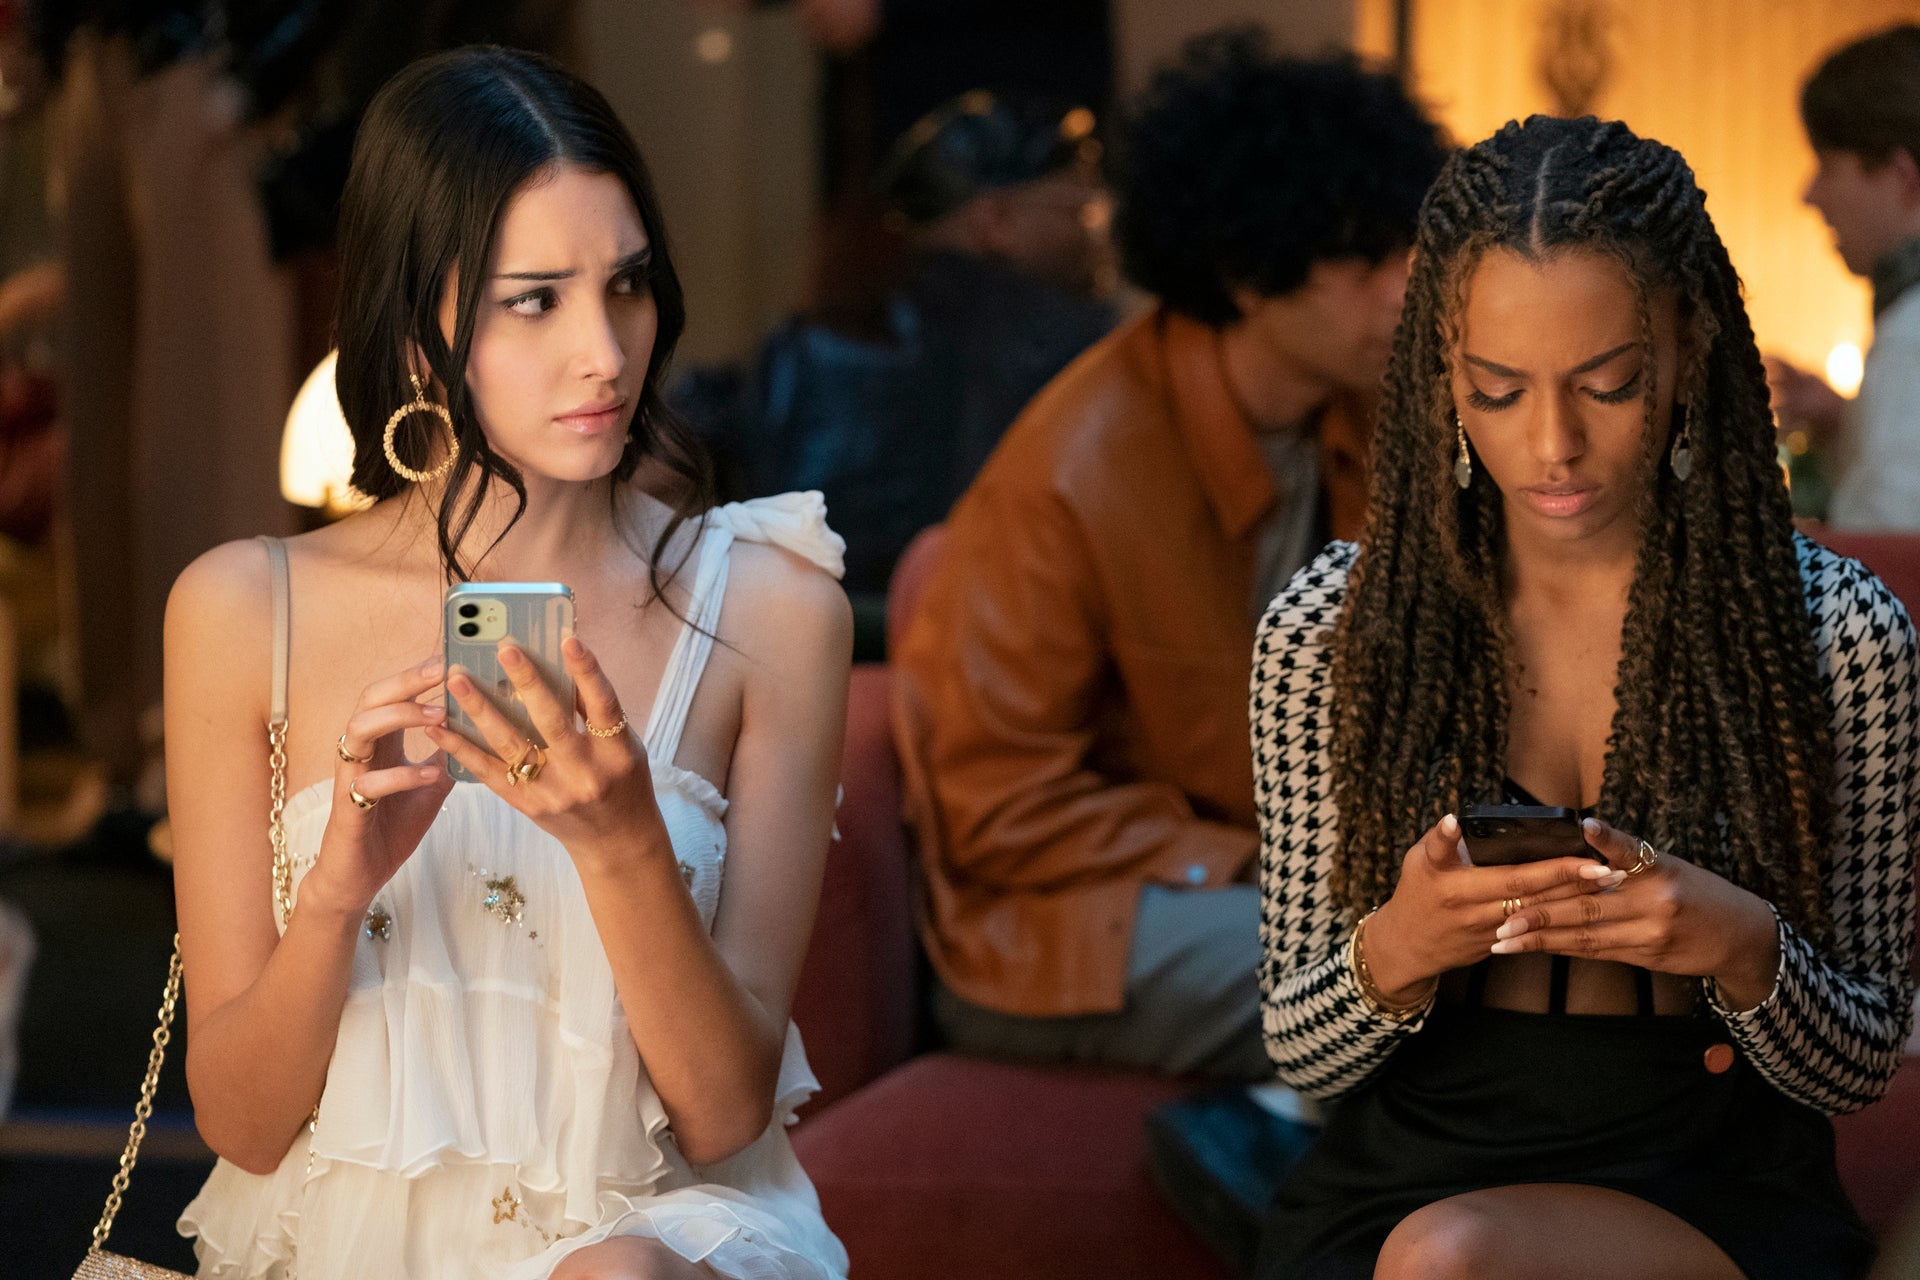 Two stylish young women on their phones at what appears to be a party